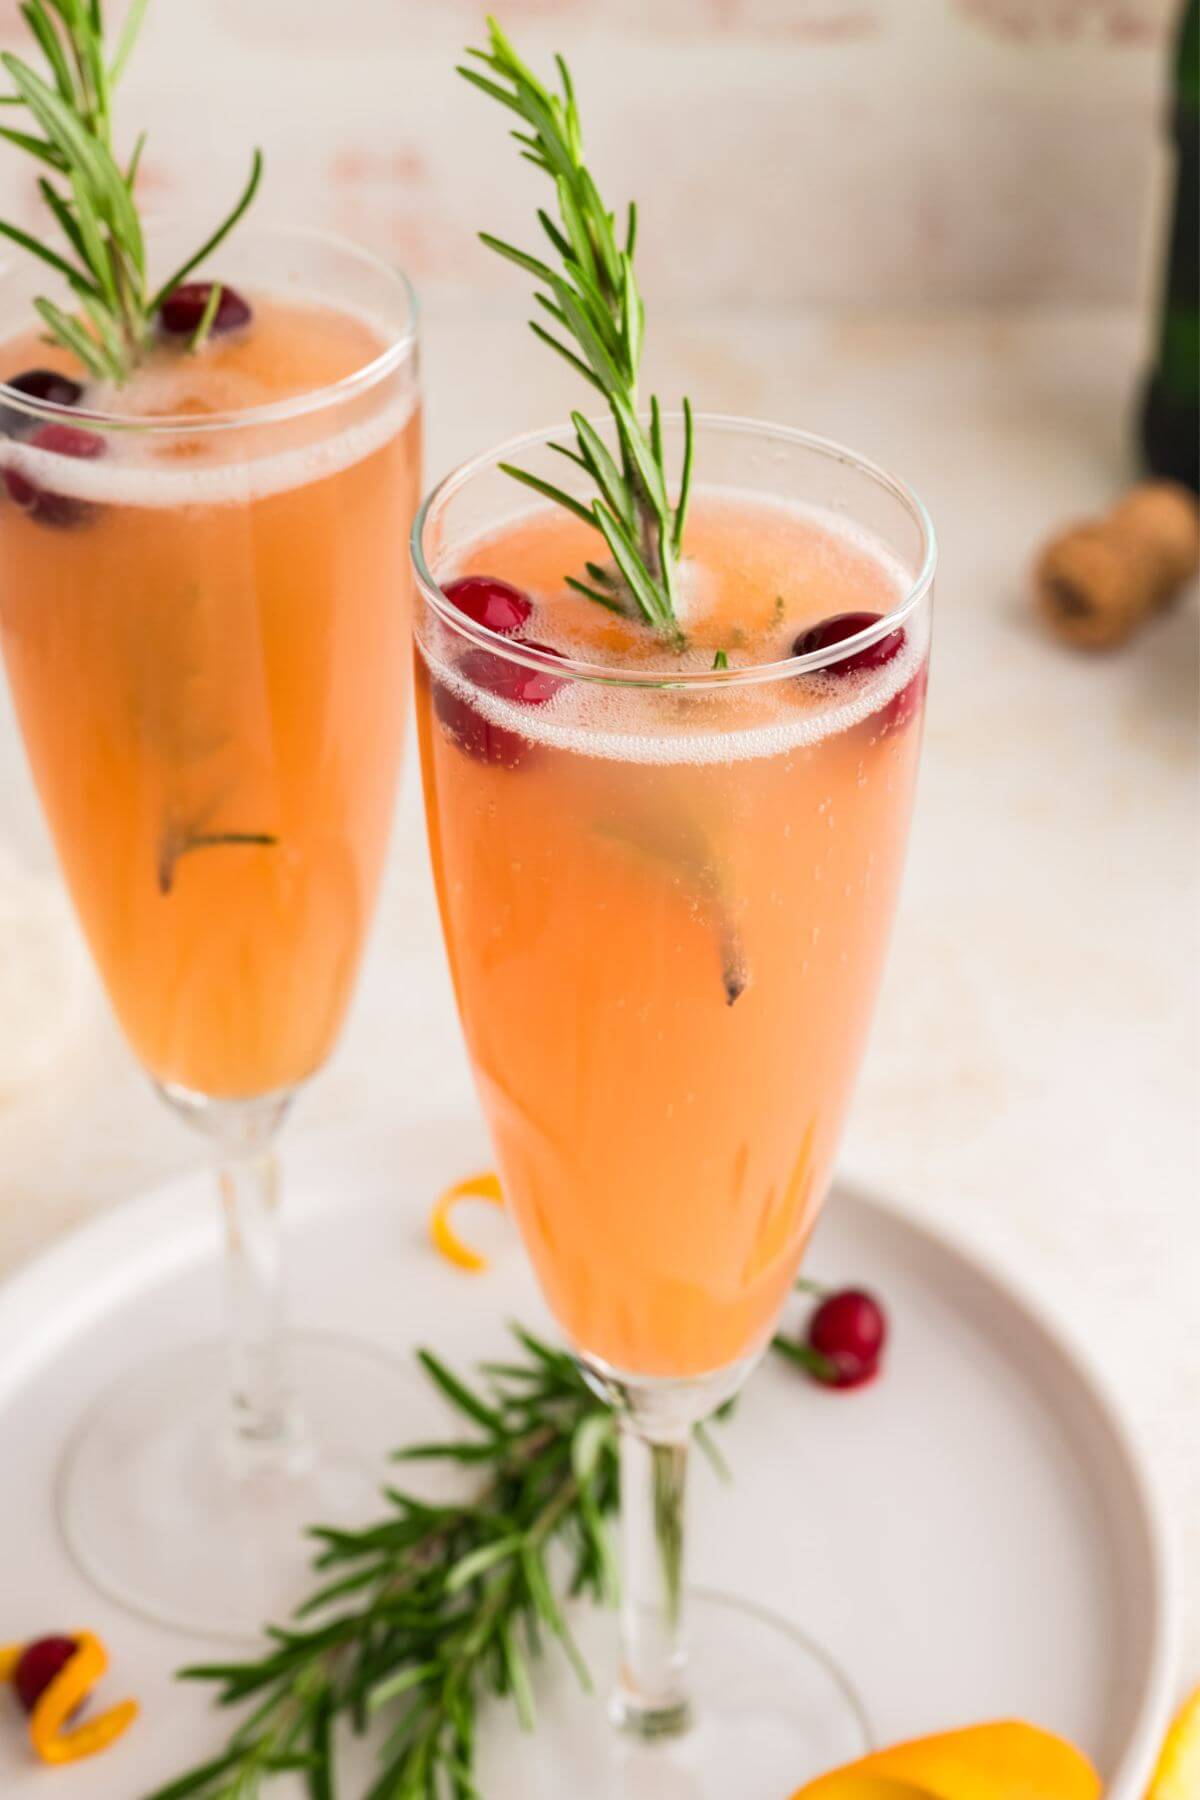 Two glasses of cranberry mimosa with rosemary garnish.